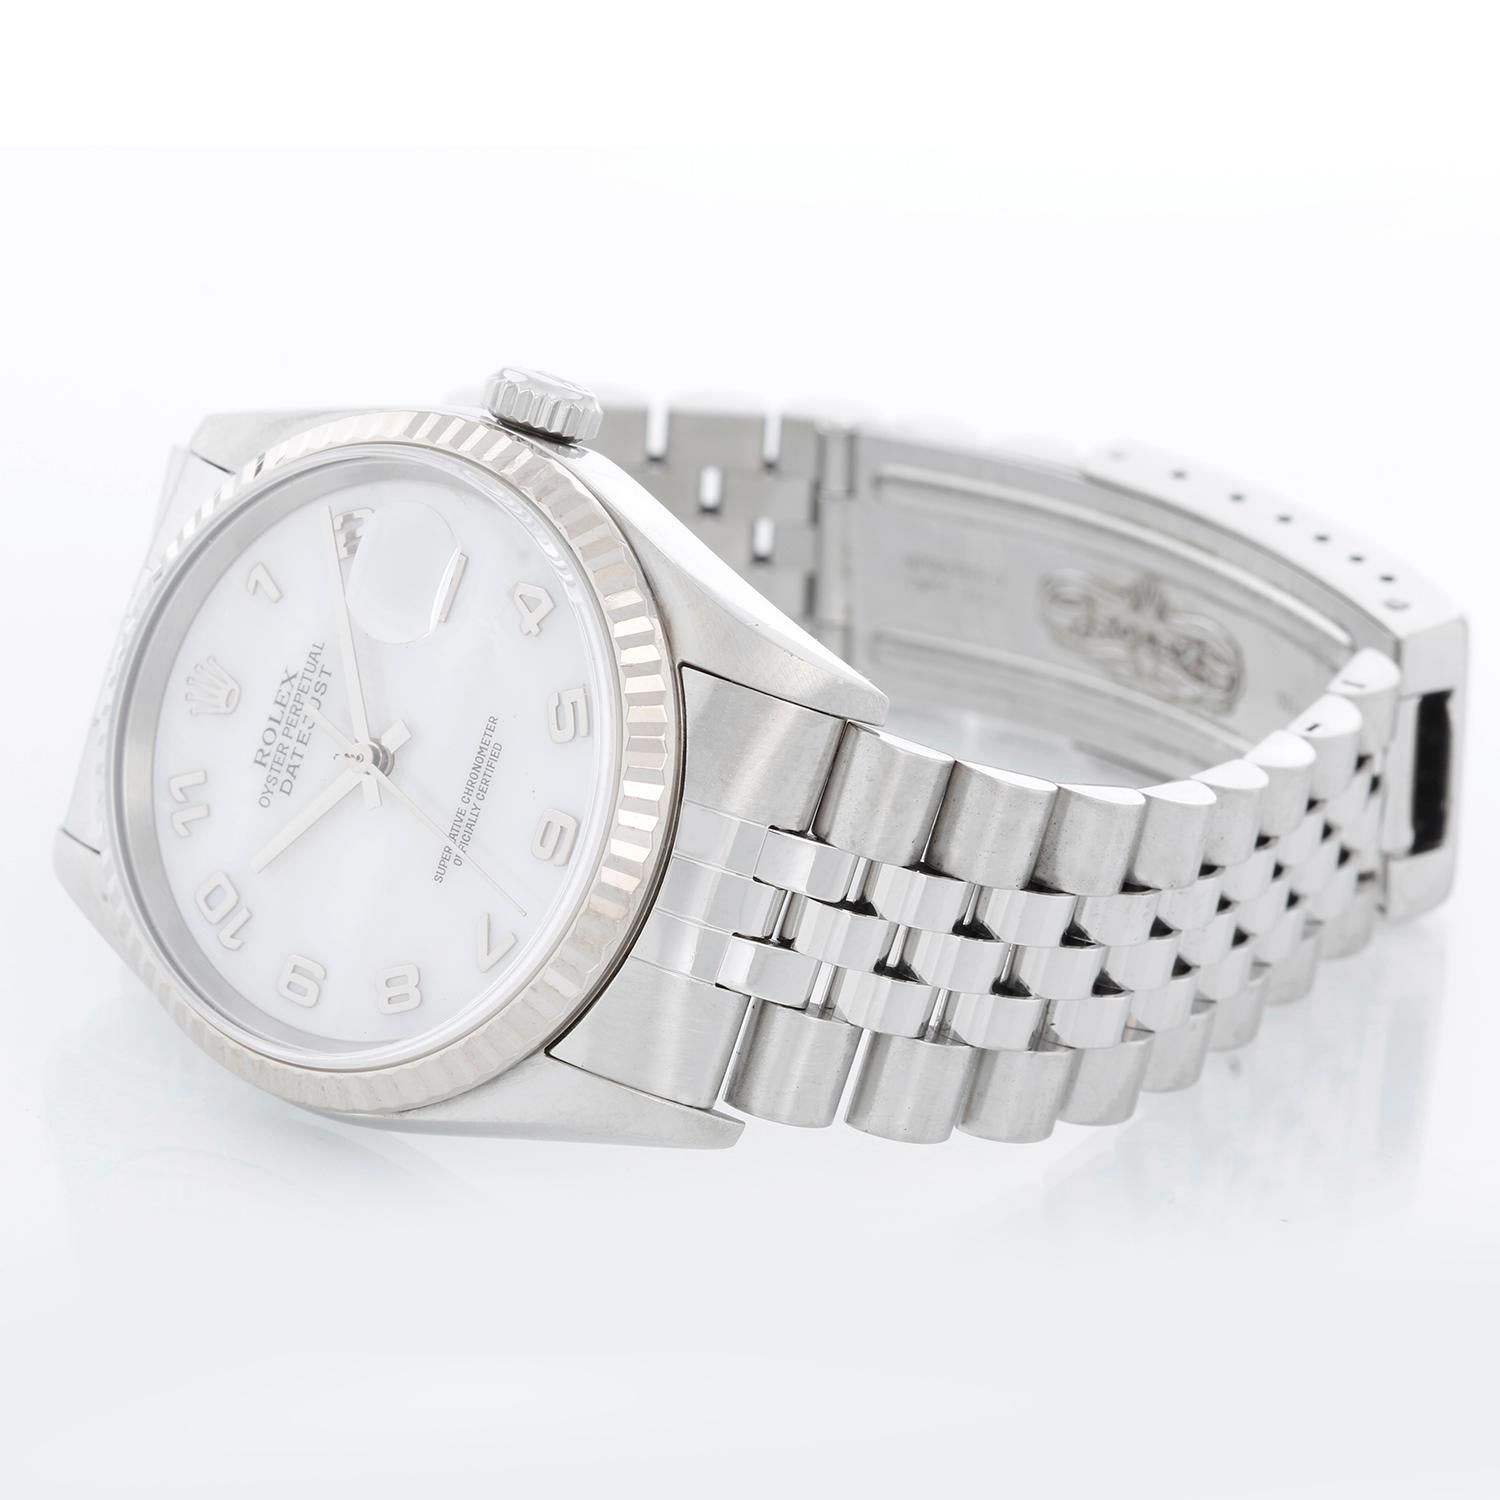 Rolex Datejust Men's Stainless Steel Watch 16234 - Automatic winding. Stainless steel case with 18k white gold fluted bezel . Factory Mother of Pearl dial . Stainless steel jubilee bracelet . Pre-owned with custom box.